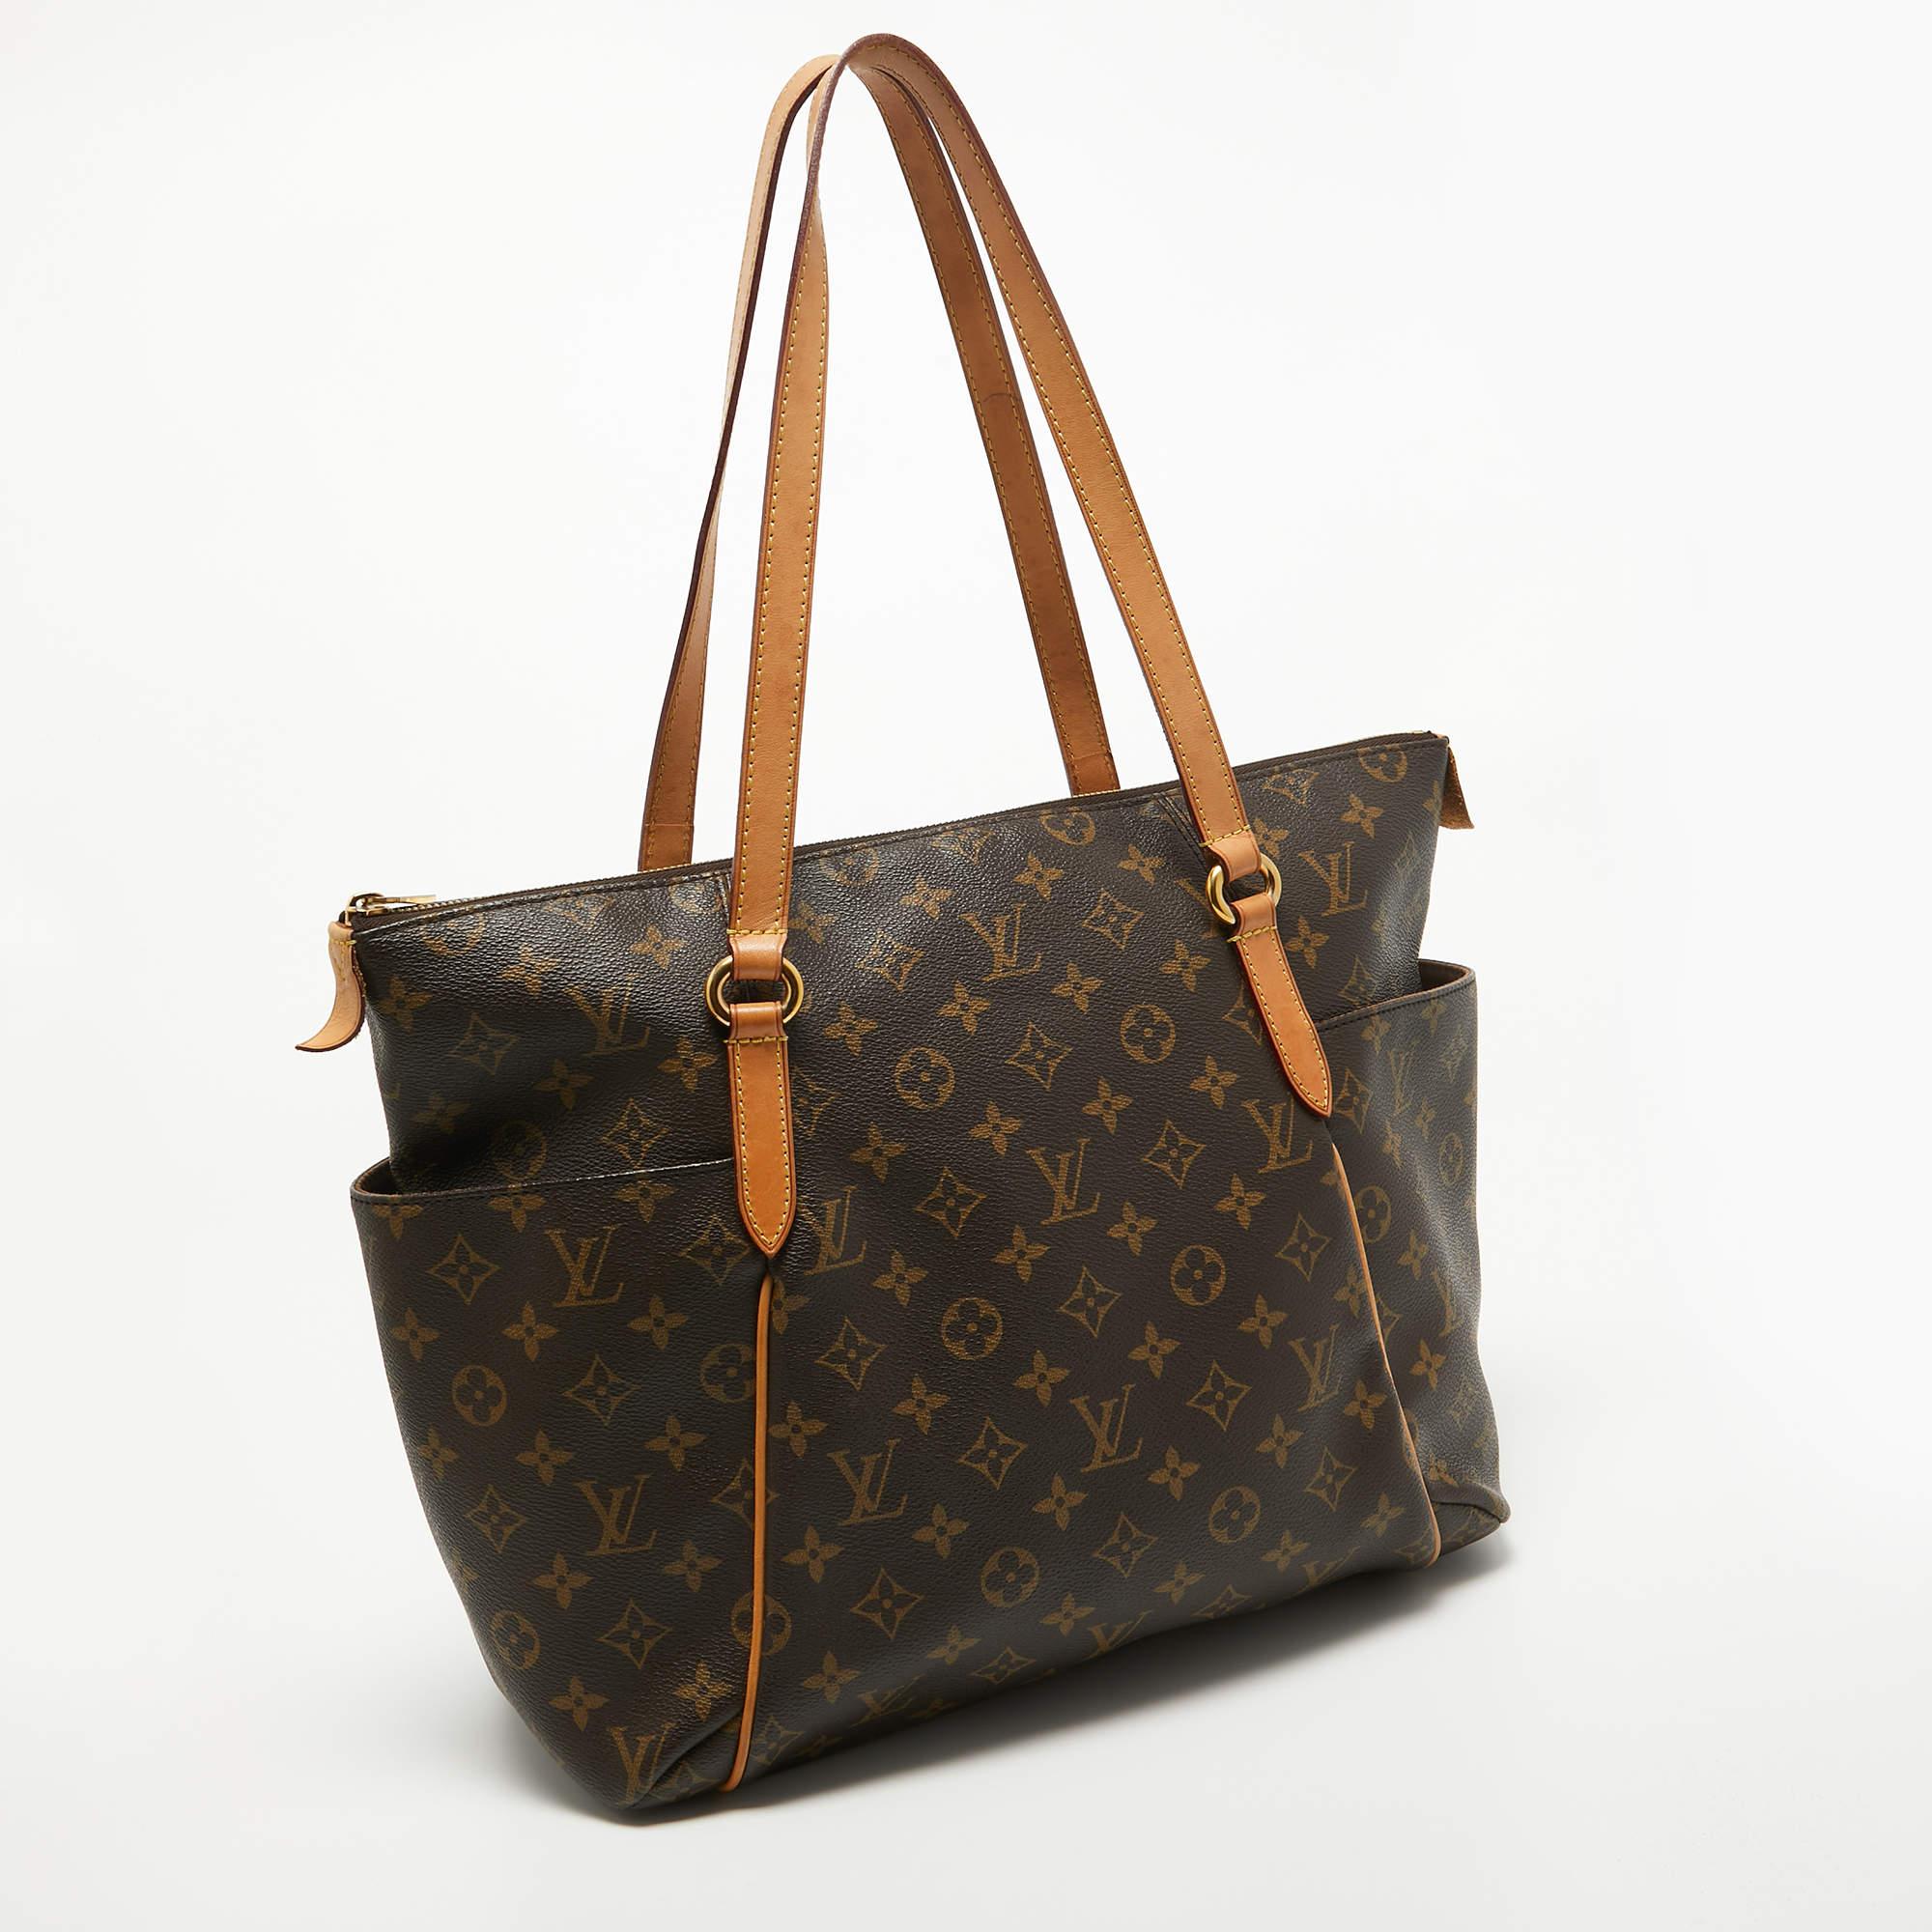 Louis Vuitton's creations are popular owing to their high style and functionality. This bag, like all the other handbags, is durable and stylish. Exuding a fine finish, the bag is designed to give a luxurious experience. The interior has enough